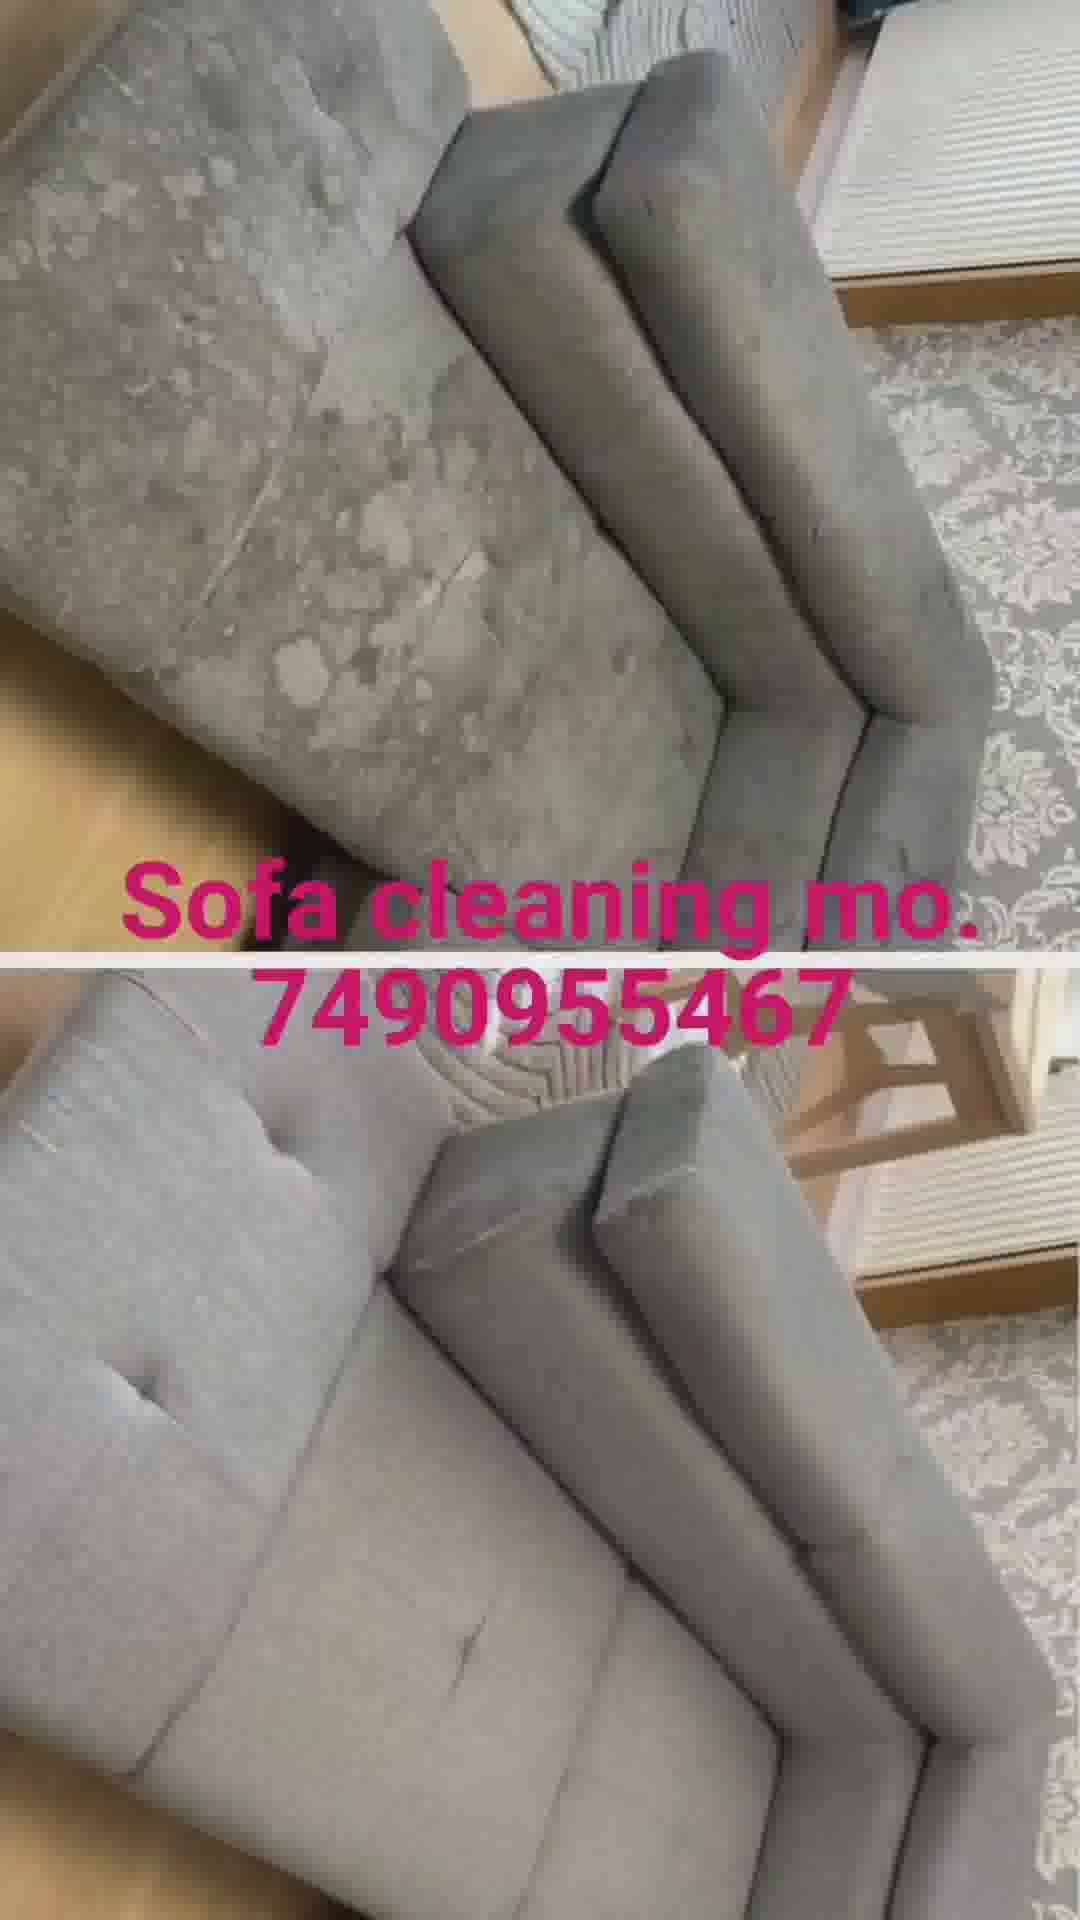 sofa cleaning
#HouseDesigns #HomeAutomation #HouseDesigns #sofacleaning